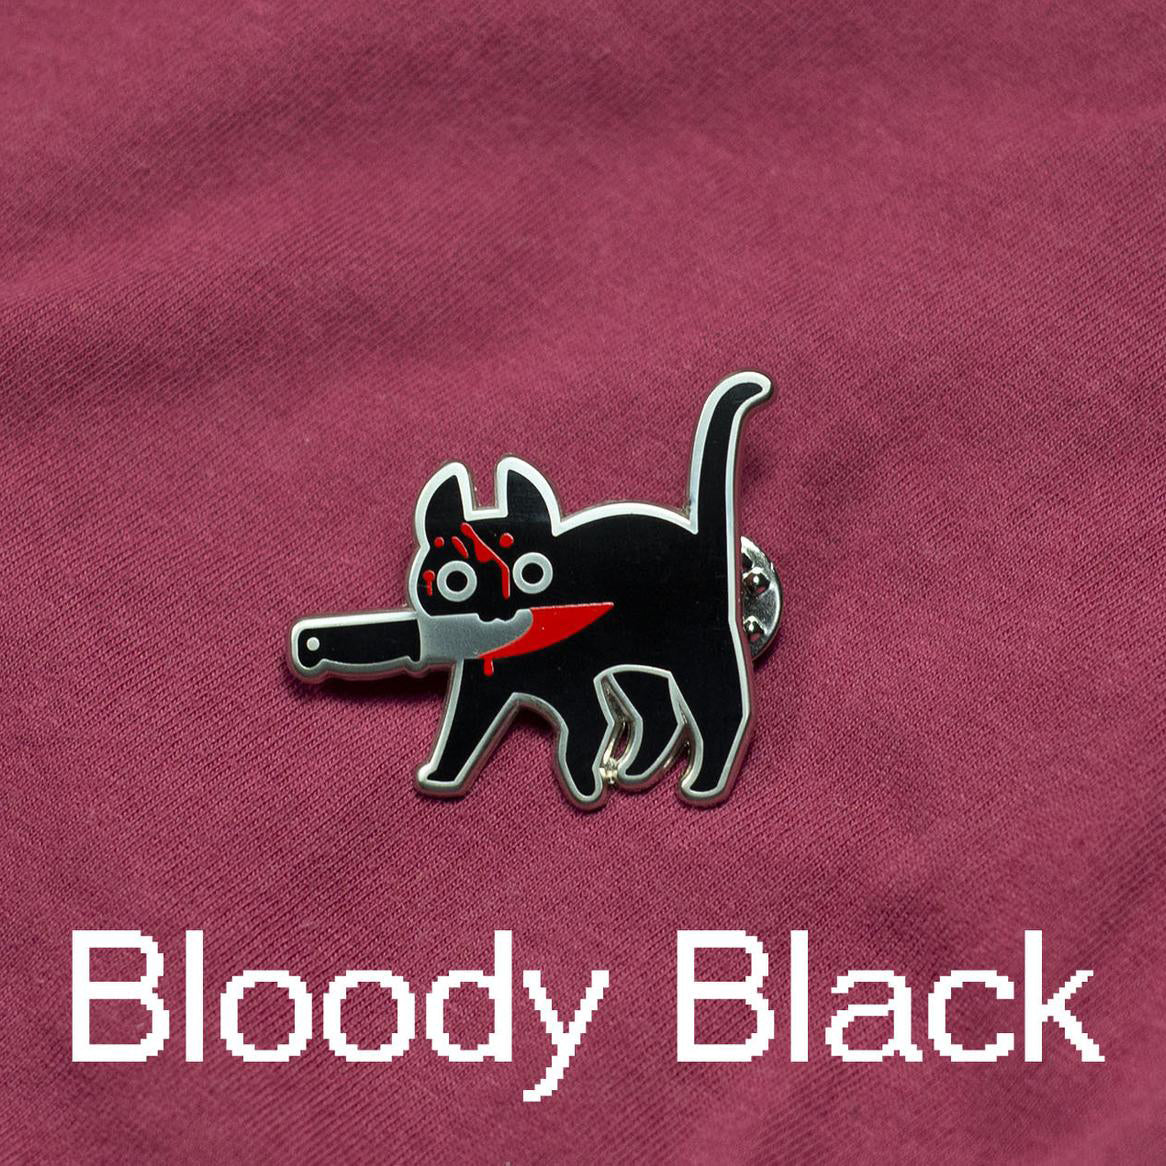 Alternate version of Silver enamel pin of black cat holding knife in mouth and covered in blood. Caption text reads: "Bloody Black" on maroon cloth background.